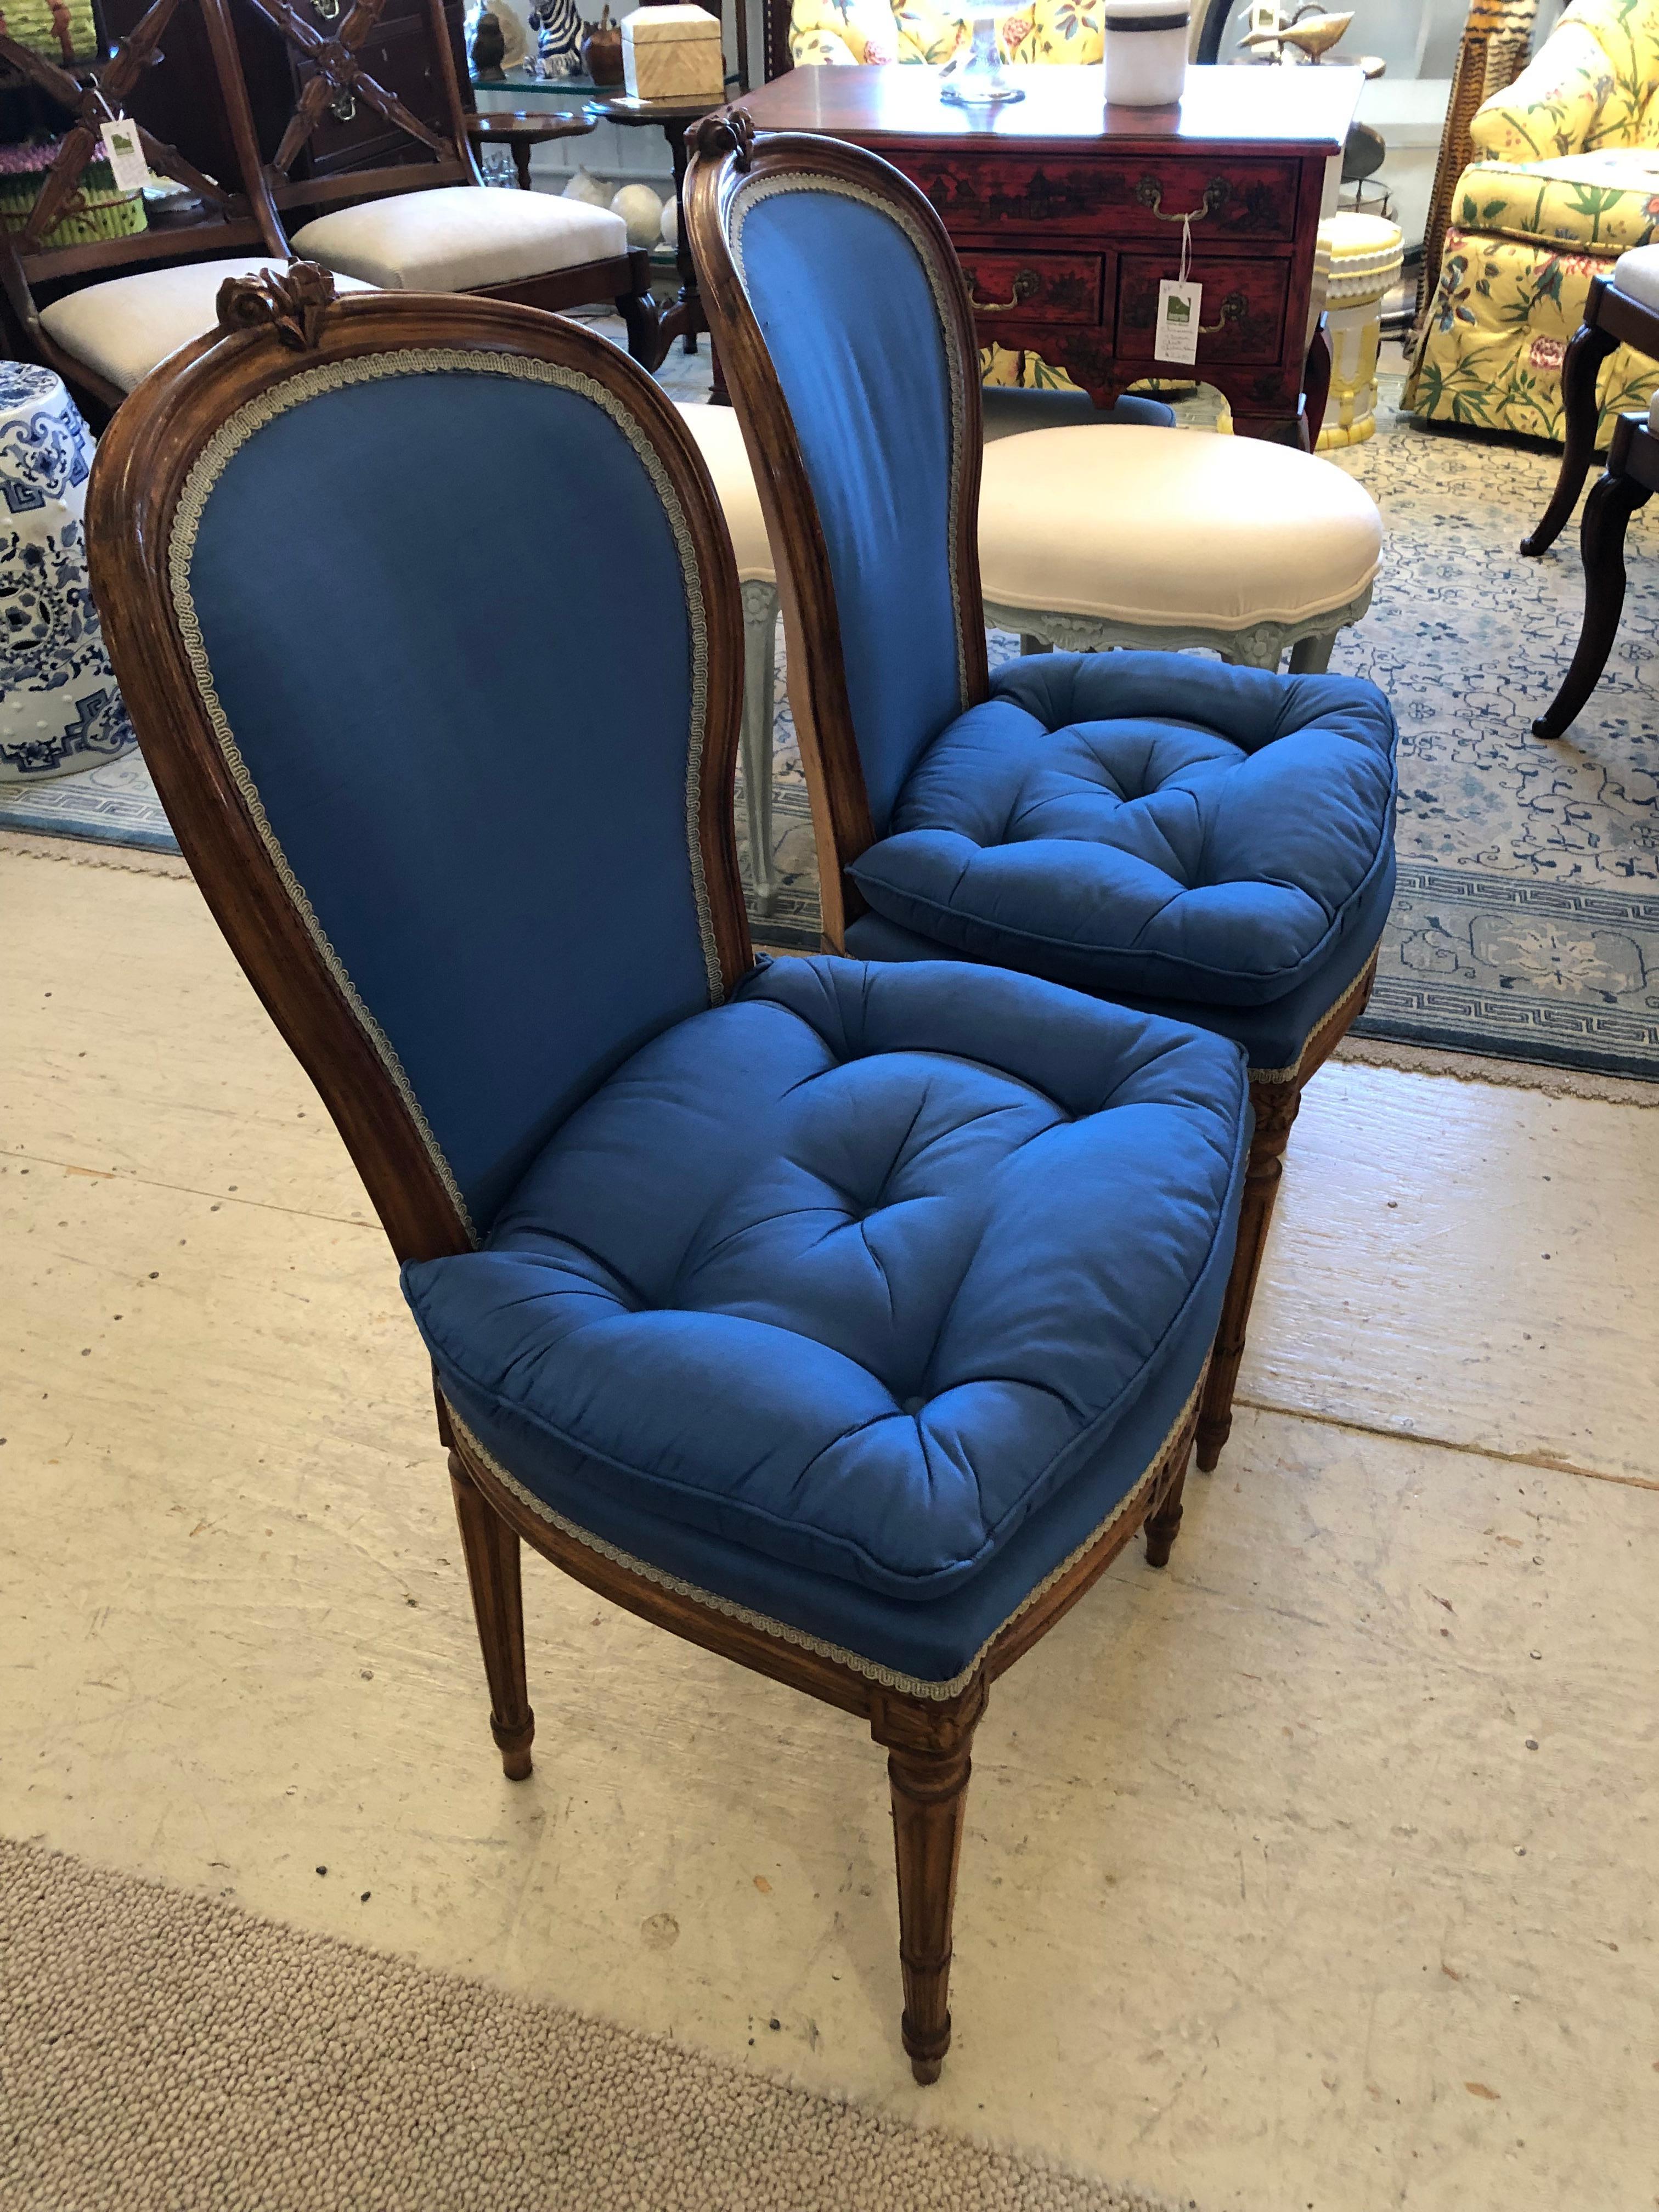 American Elegant Pair of Antique Carved Wood and Cobalt Blue Upholstered Salon Chairs